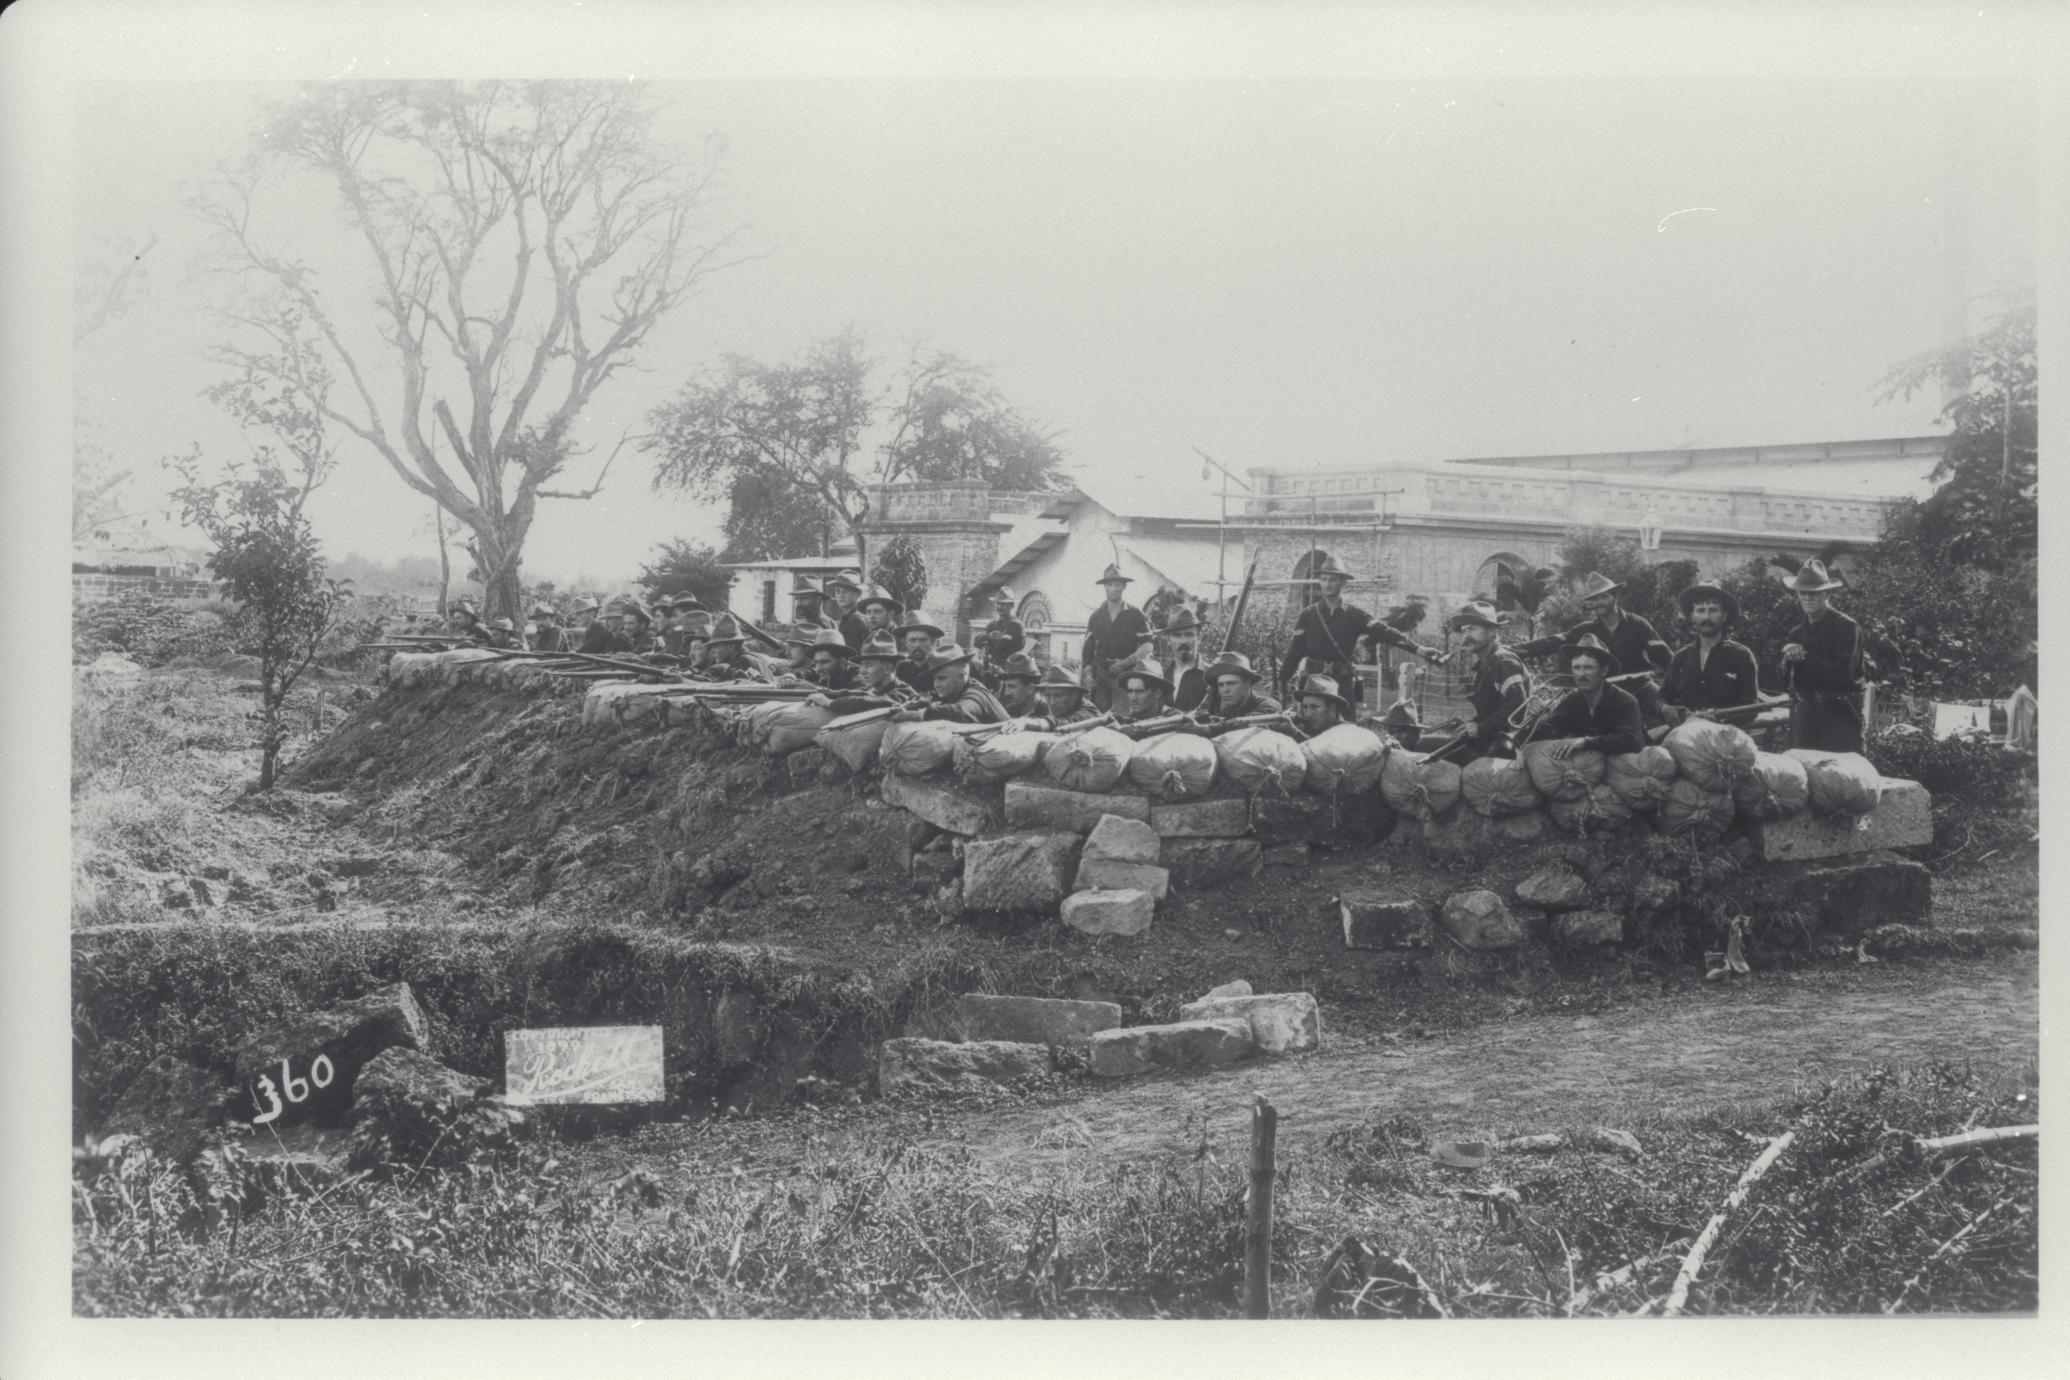 Company of American soldiers dug into defensive position at the Antohan pumping station, 1899